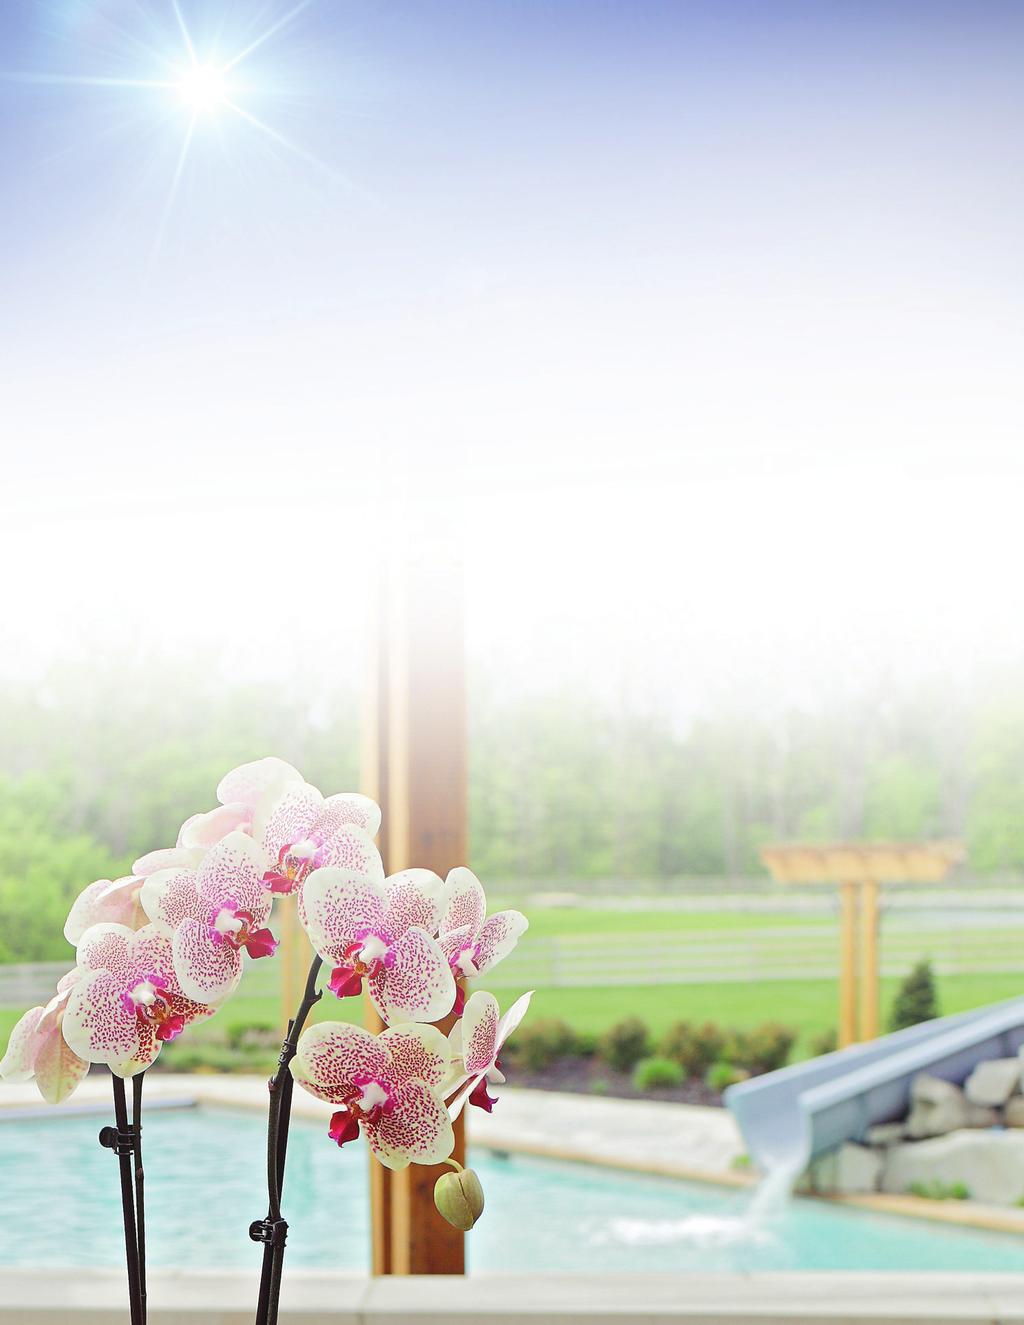 Staying Cool Through Summer While many of the springtime orchid precautions carry over to the summer months, changes in temperature and your schedule might require additional care. What Changes?